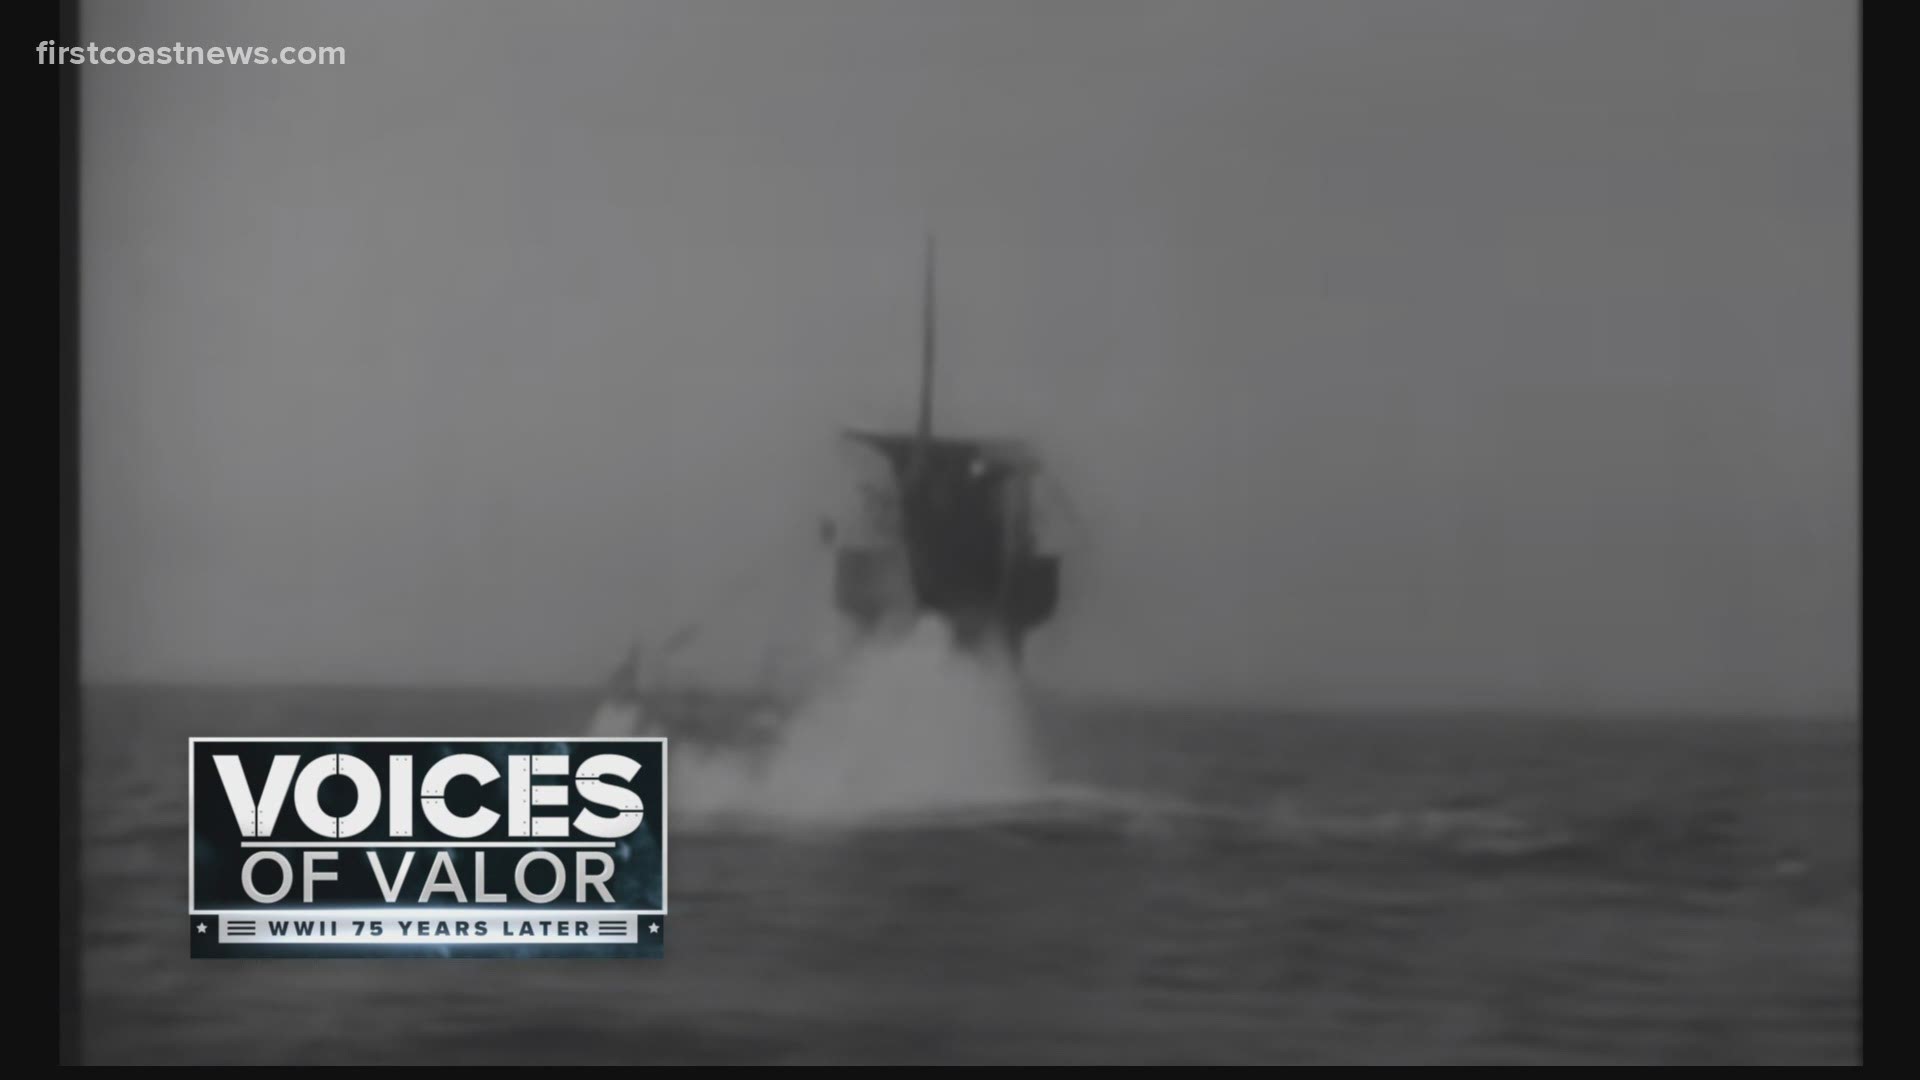 Submariners suffered some of the greatest loss during World War II because when a boat went down, there was generally no escape.